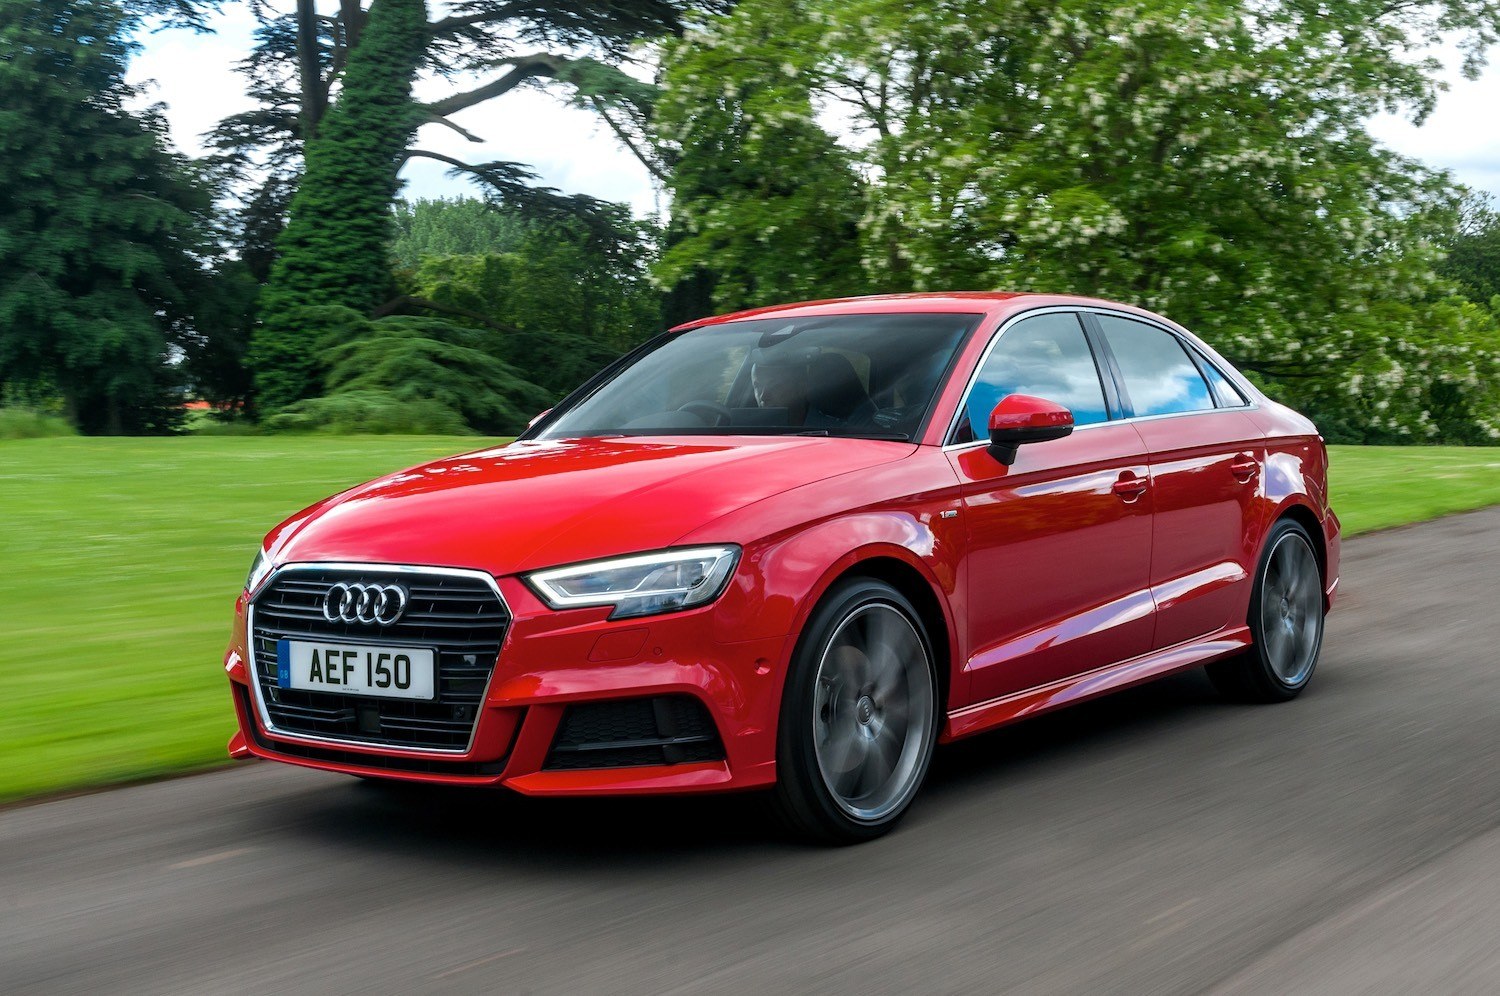 Tom Scanlan reviews the Audi A3 Saloon for Drive 9